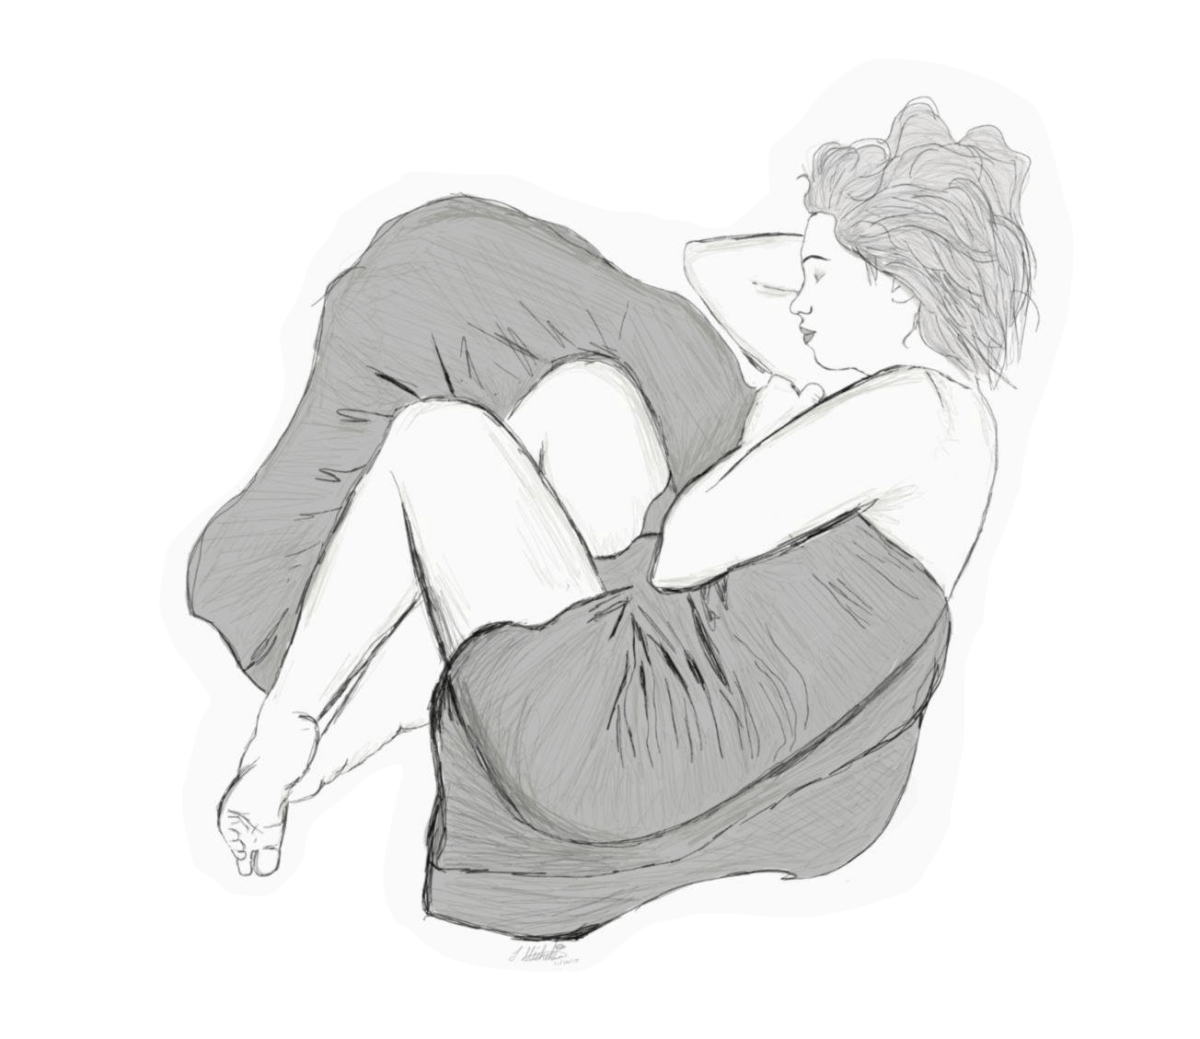 A black and white illustration of a woman curled up in bed with a blanket covering her.